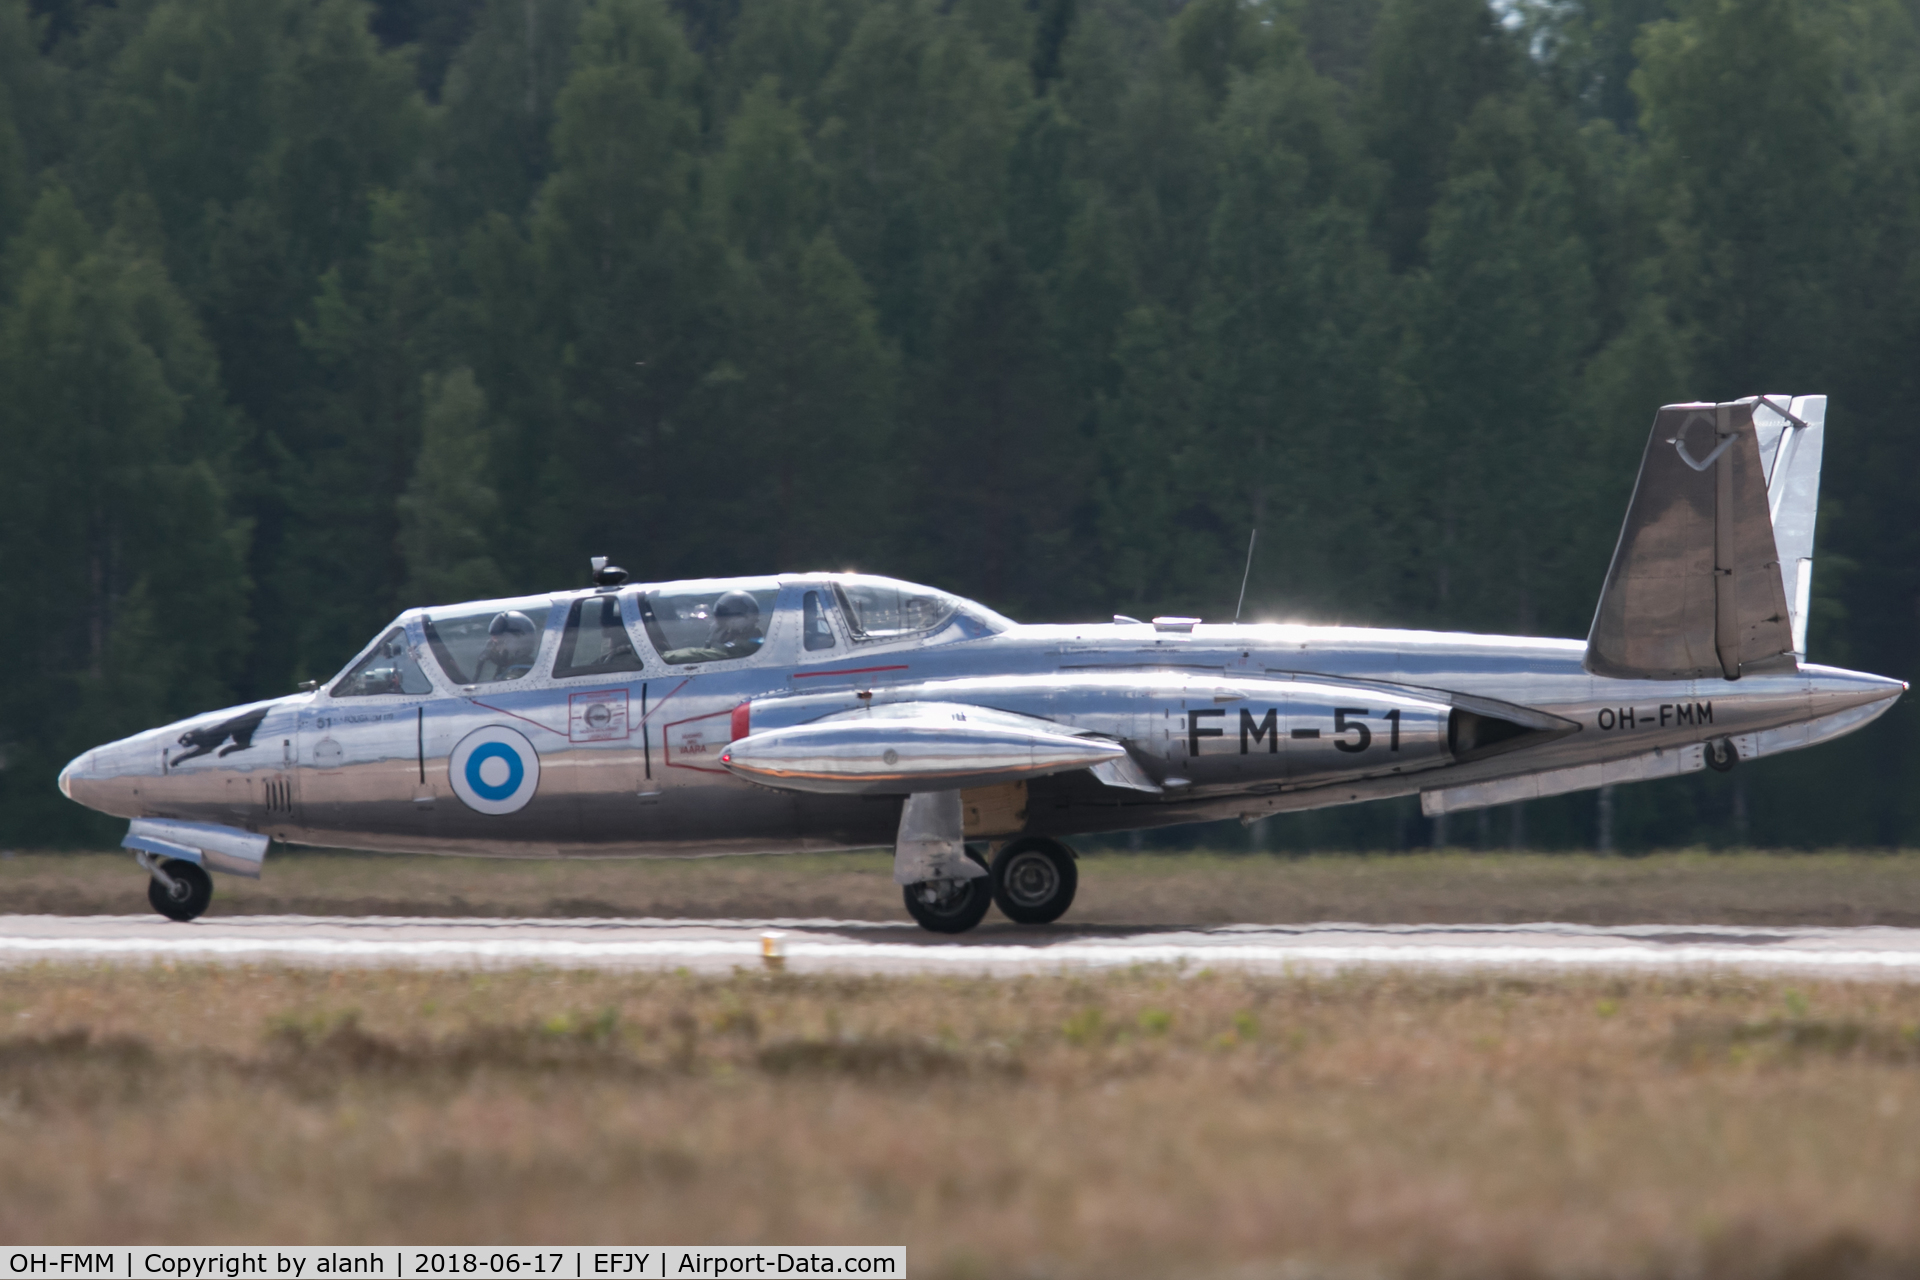 OH-FMM, 1963 Fouga (Valmet) CM-170R Magister C/N FM-51, Landing after displaying at the 100th Anniversary of the Finnish Air Force airshow